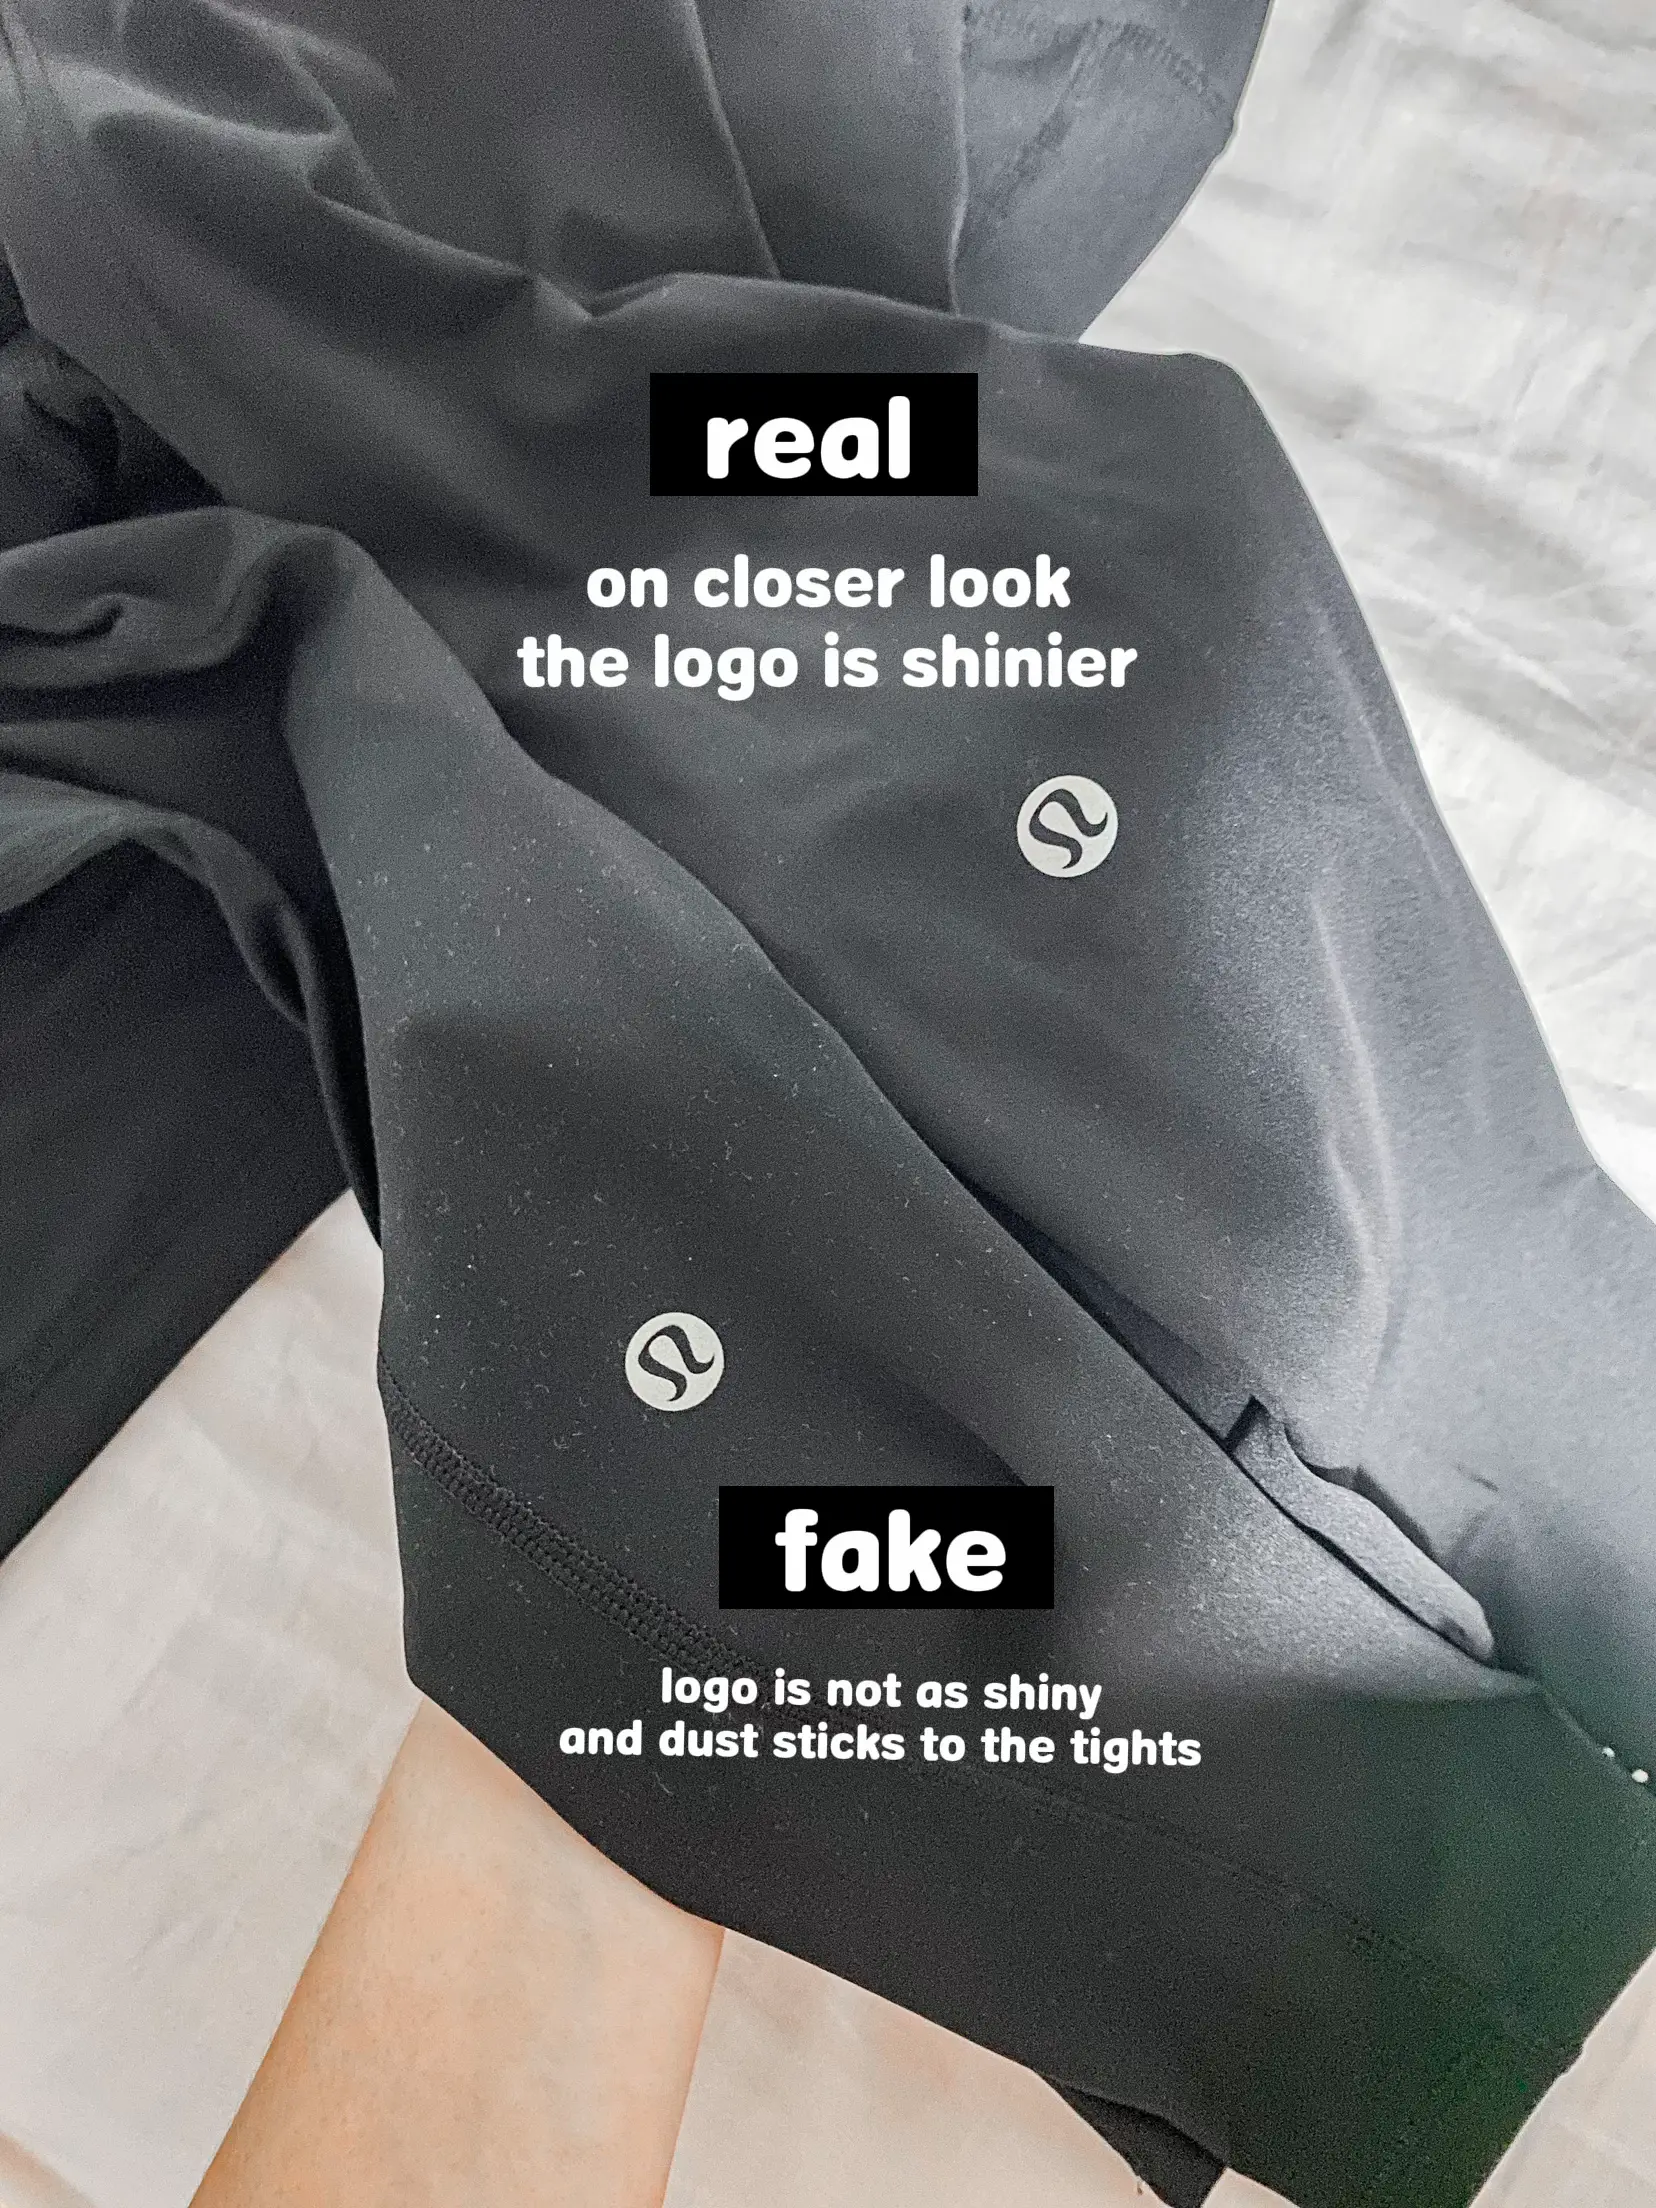 How to Tell If Lululemon Is Fake